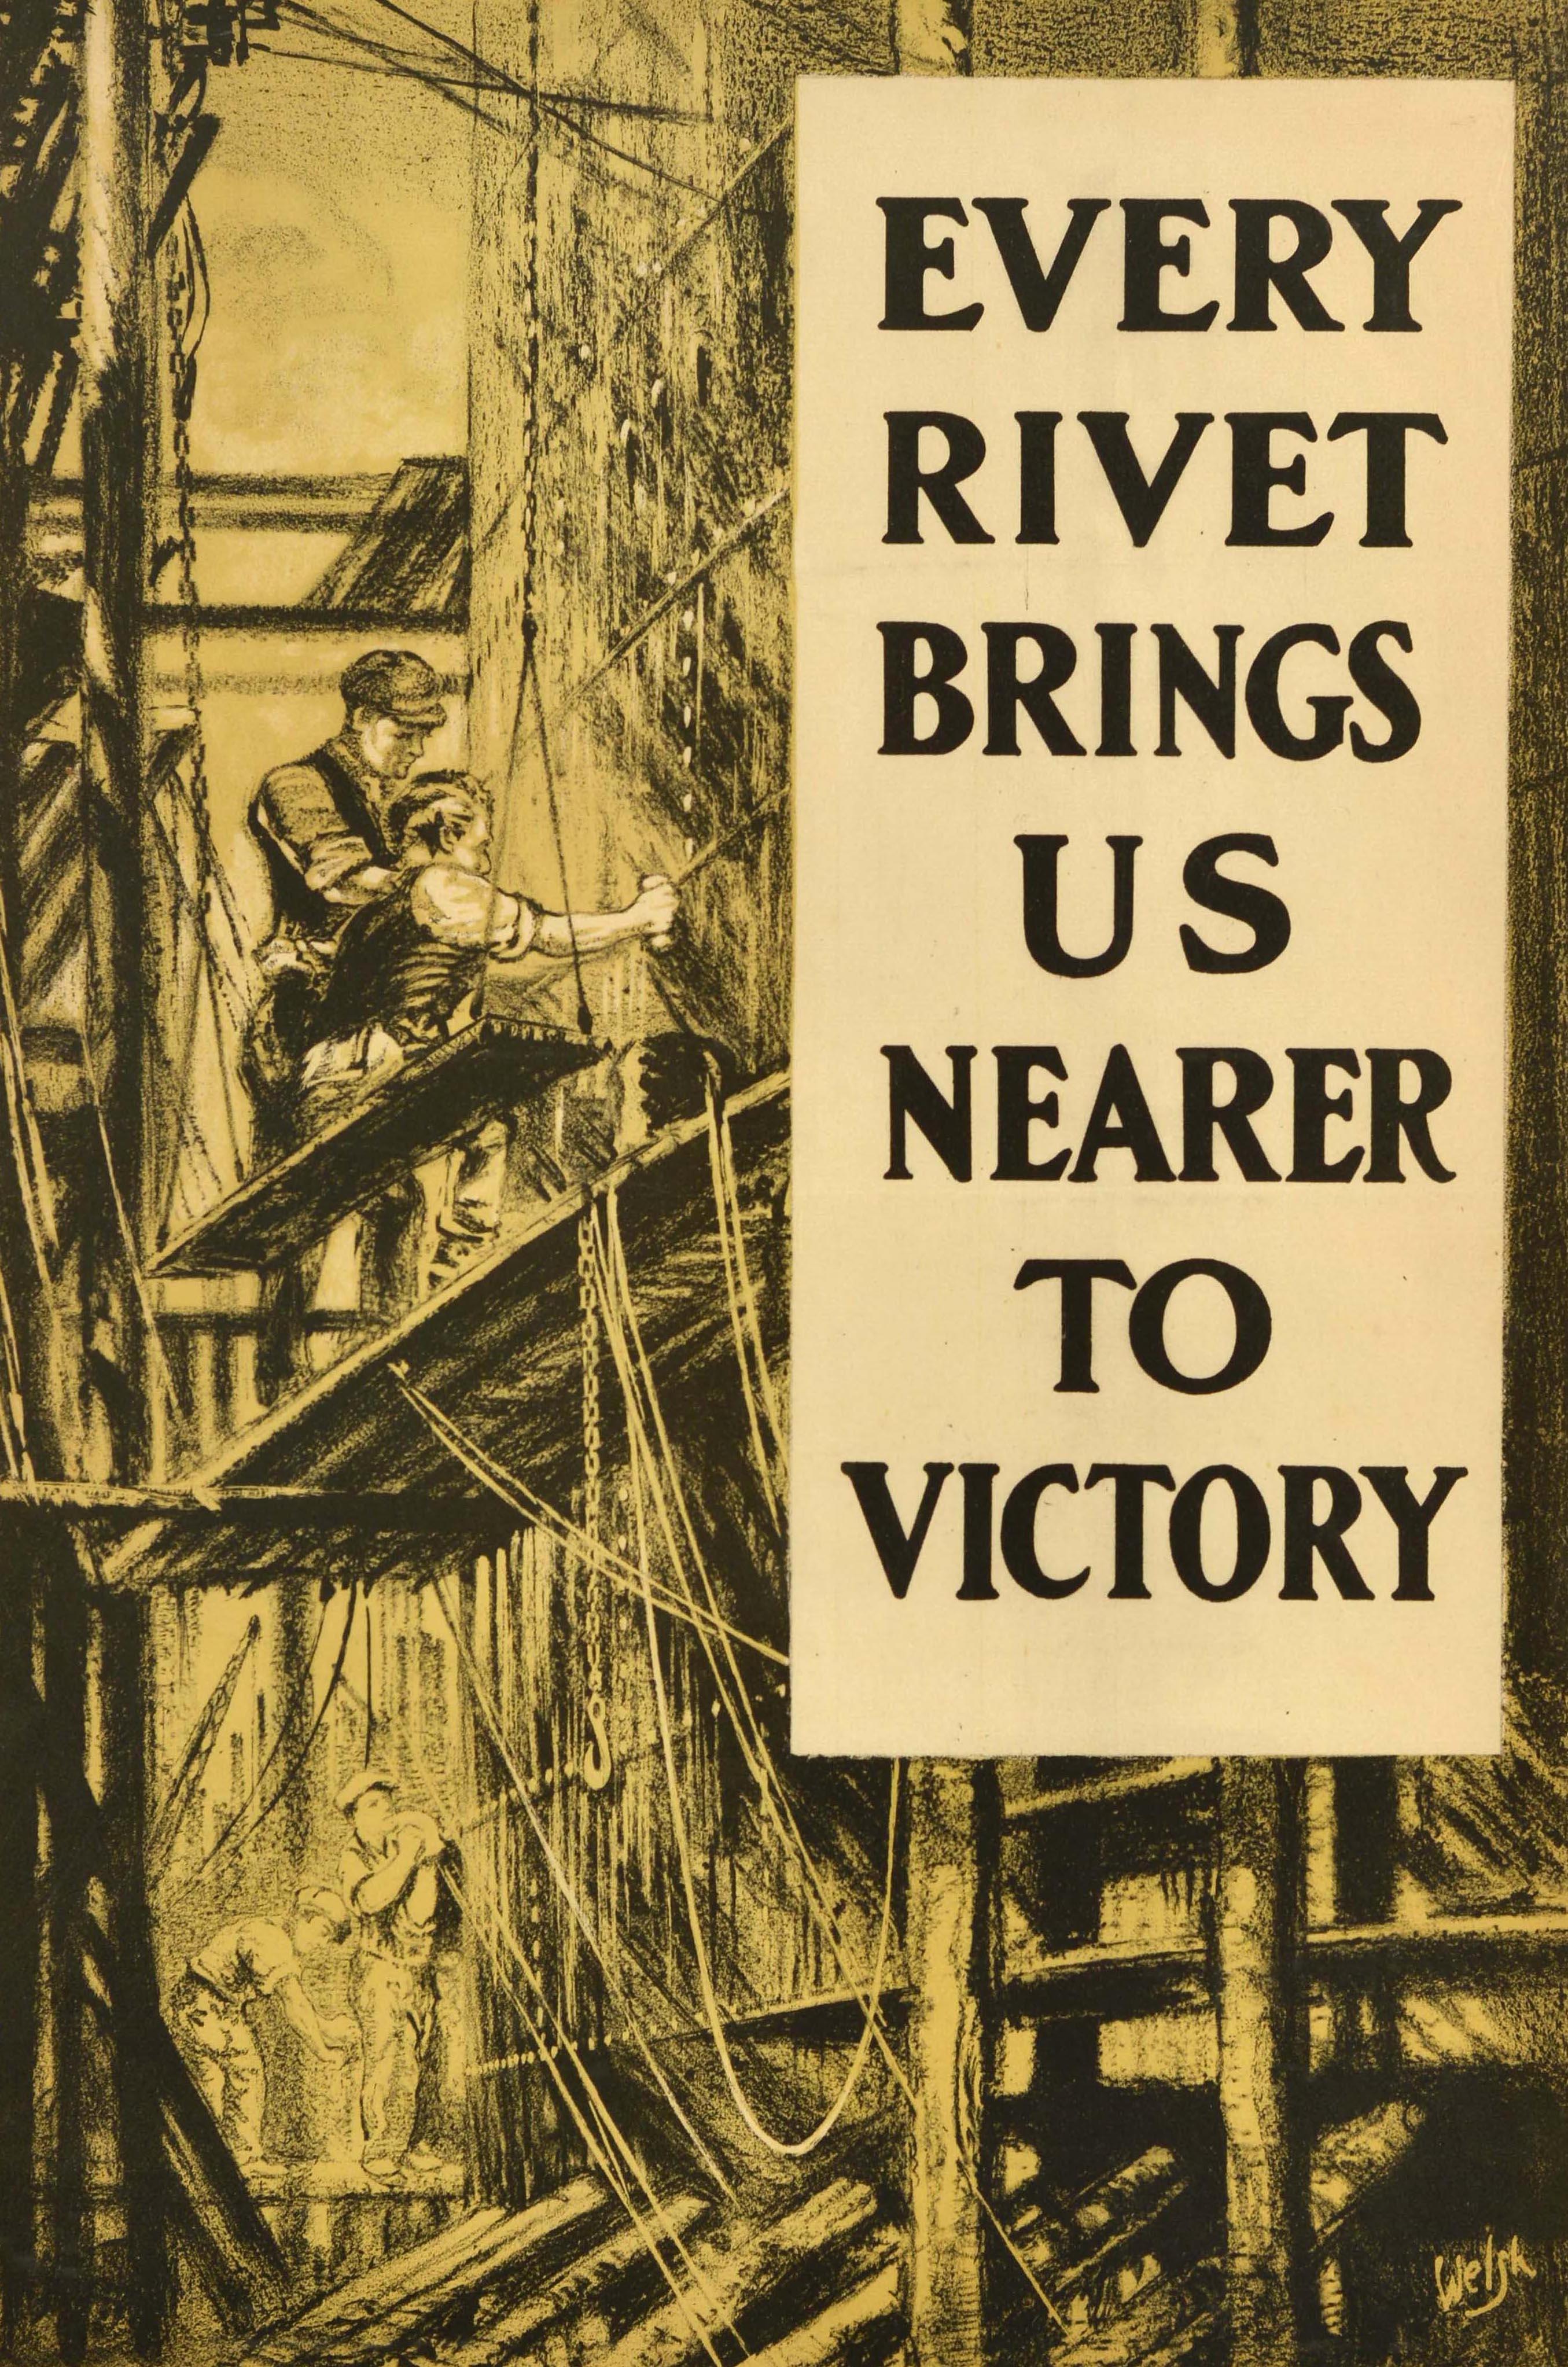 Original antique World War One home front poster - Every Rivet Brings Us Nearer To Victory - featuring an industrial illustration of ship building workers on scaffolding with the bold text down the side. Printed by Banks Ltd. Good condition,